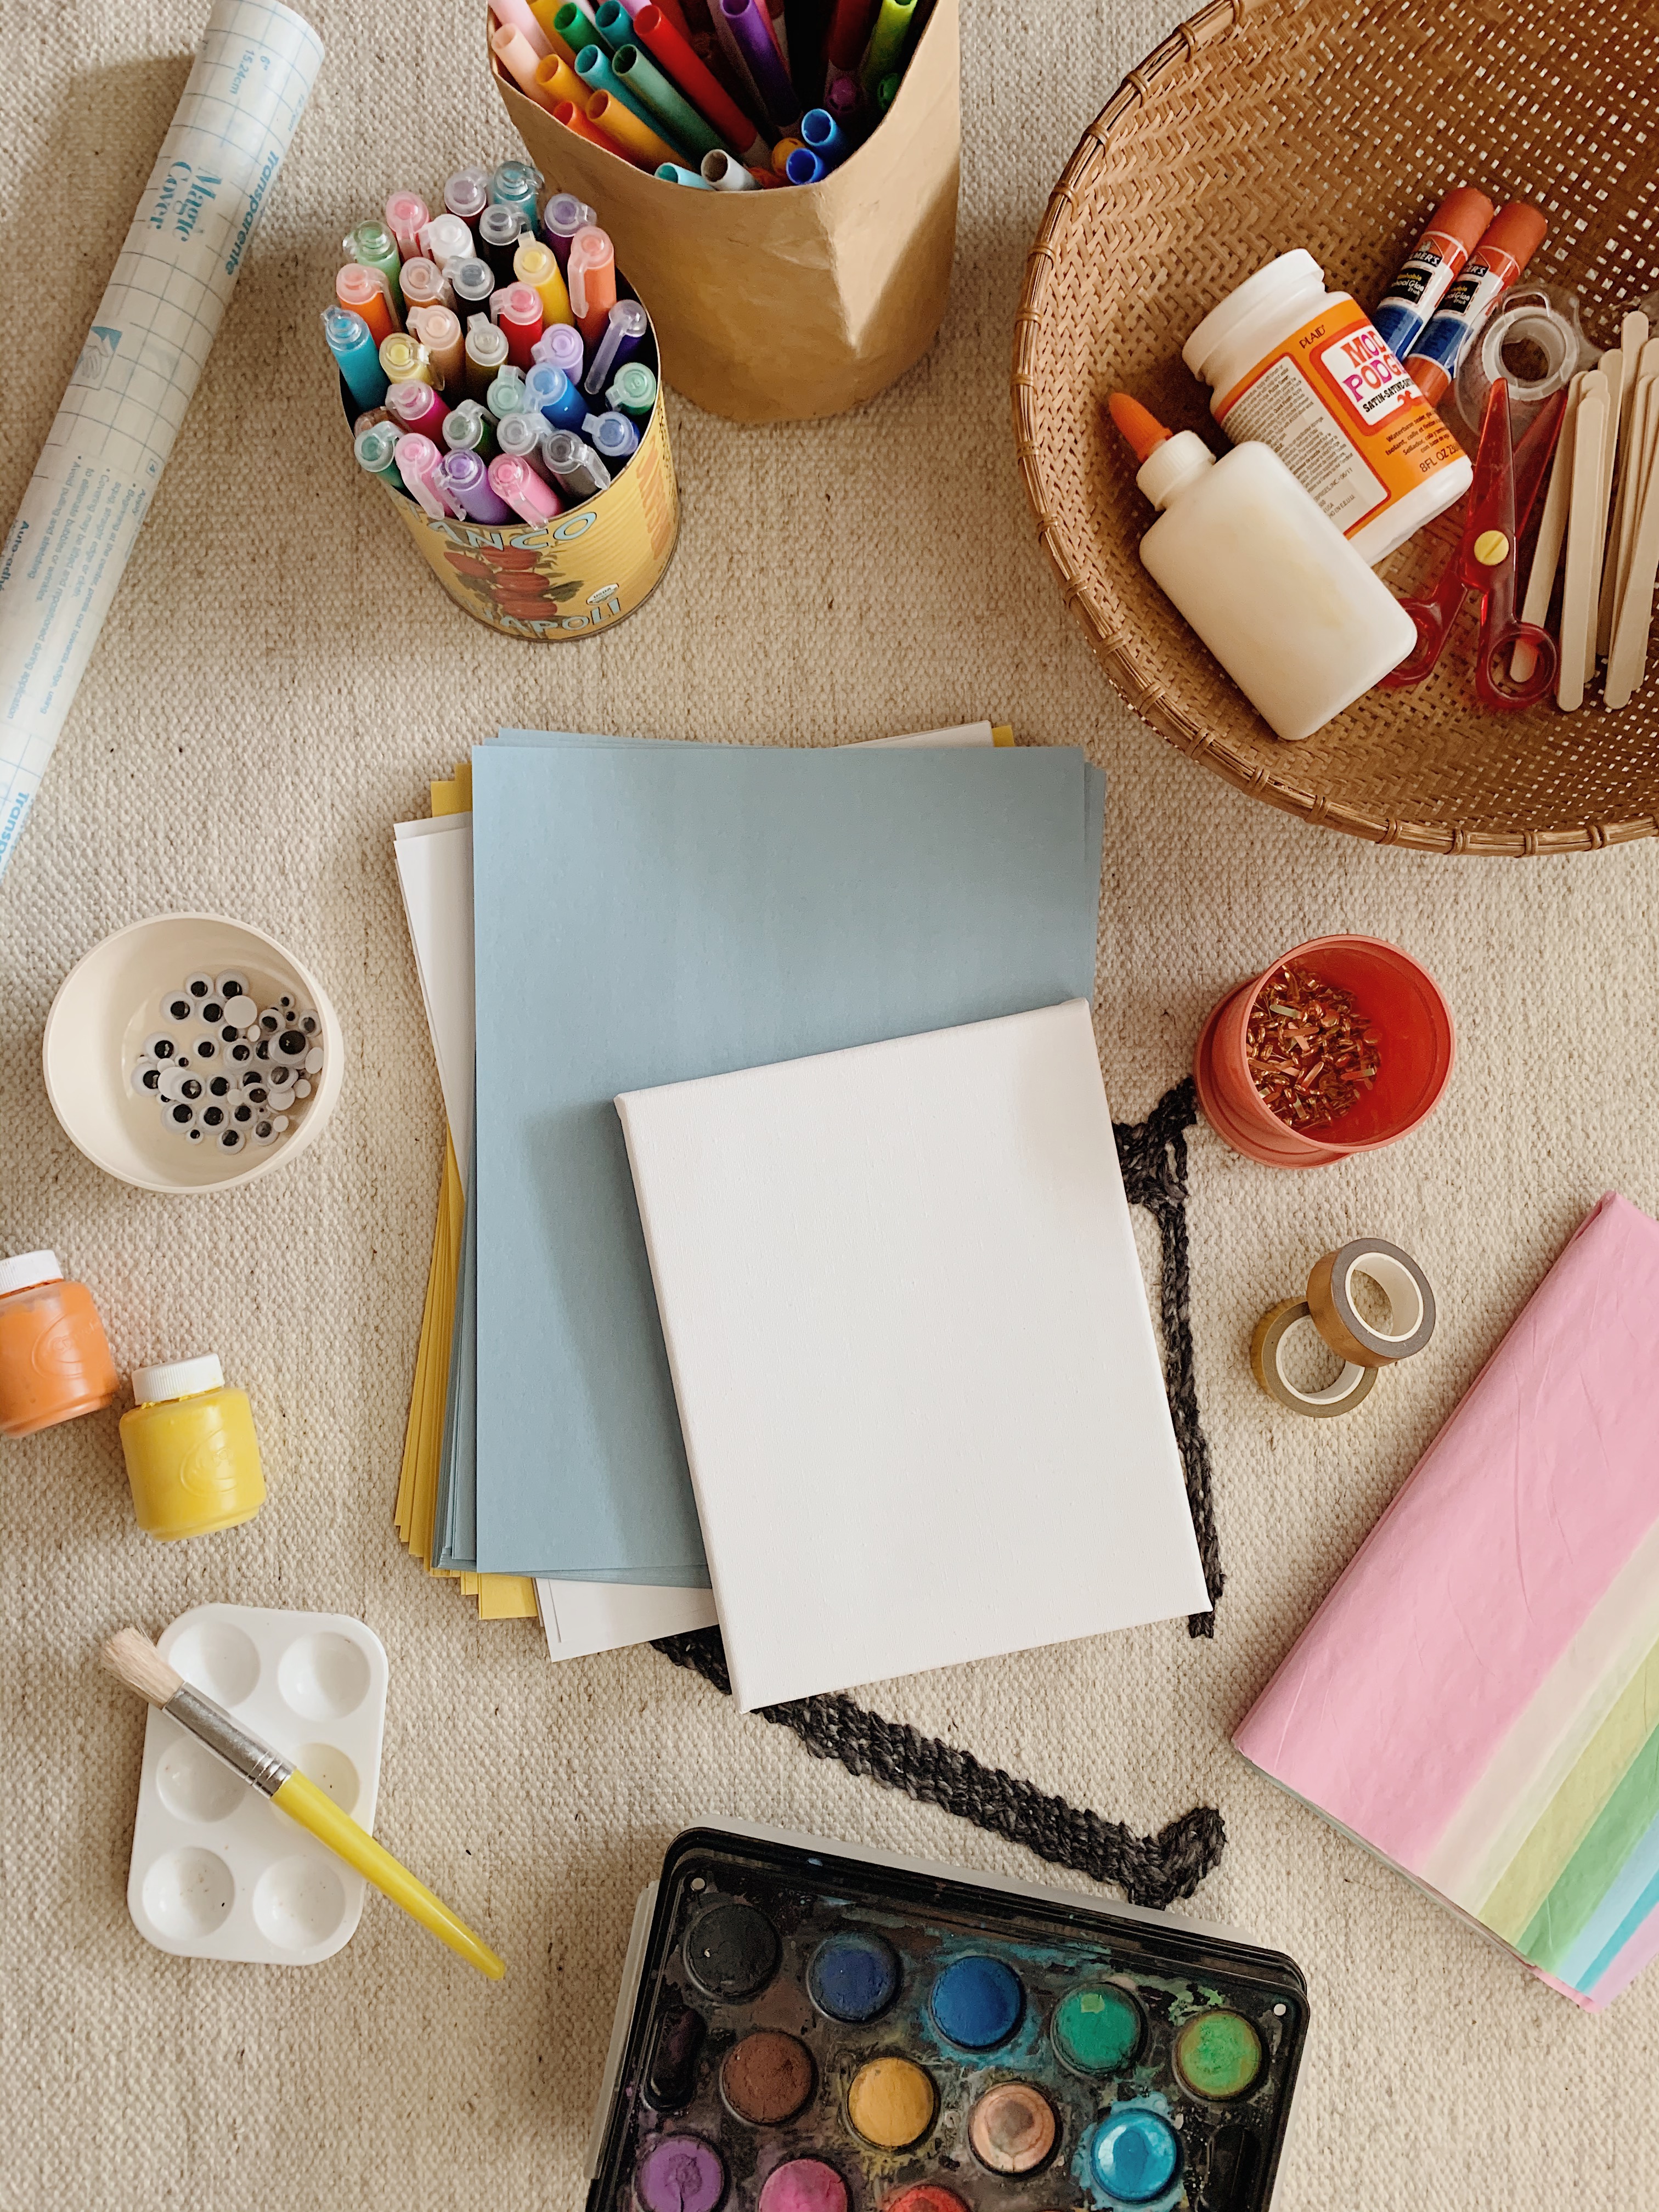 Image of various crafting supplies.